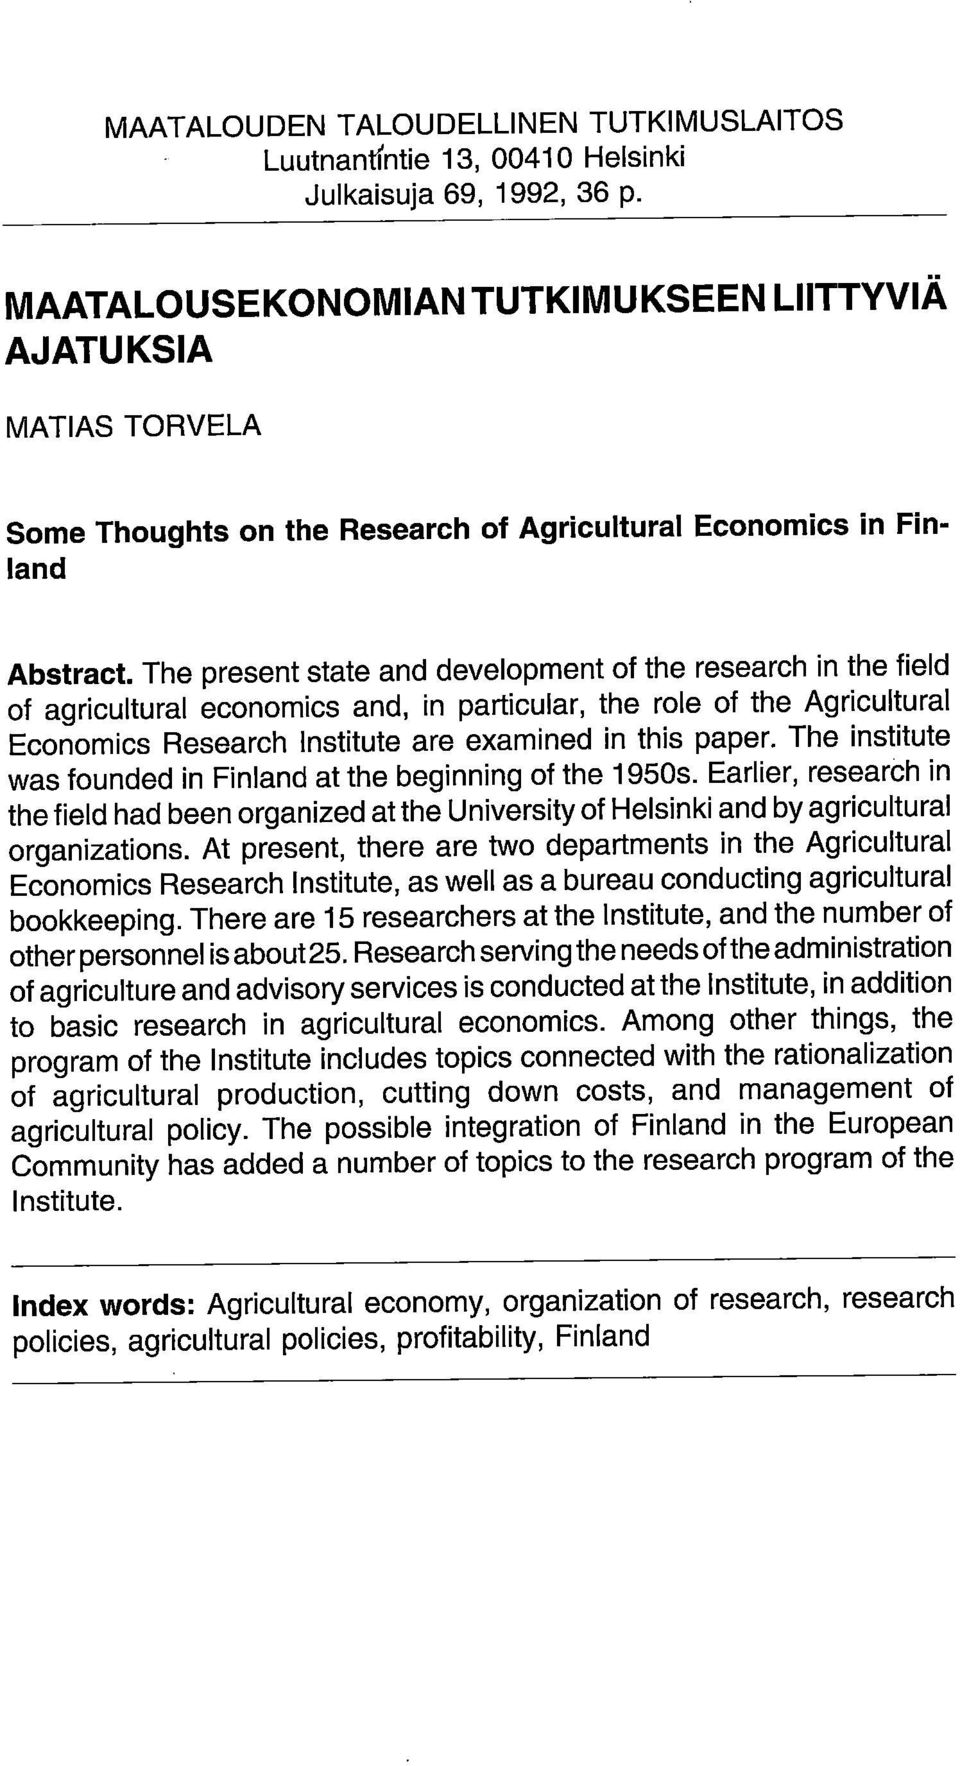 The present state and development of the research in the field of agricultural economics and, in particular, the role of the Agricultural Economics Research Institute are examined in this paper.